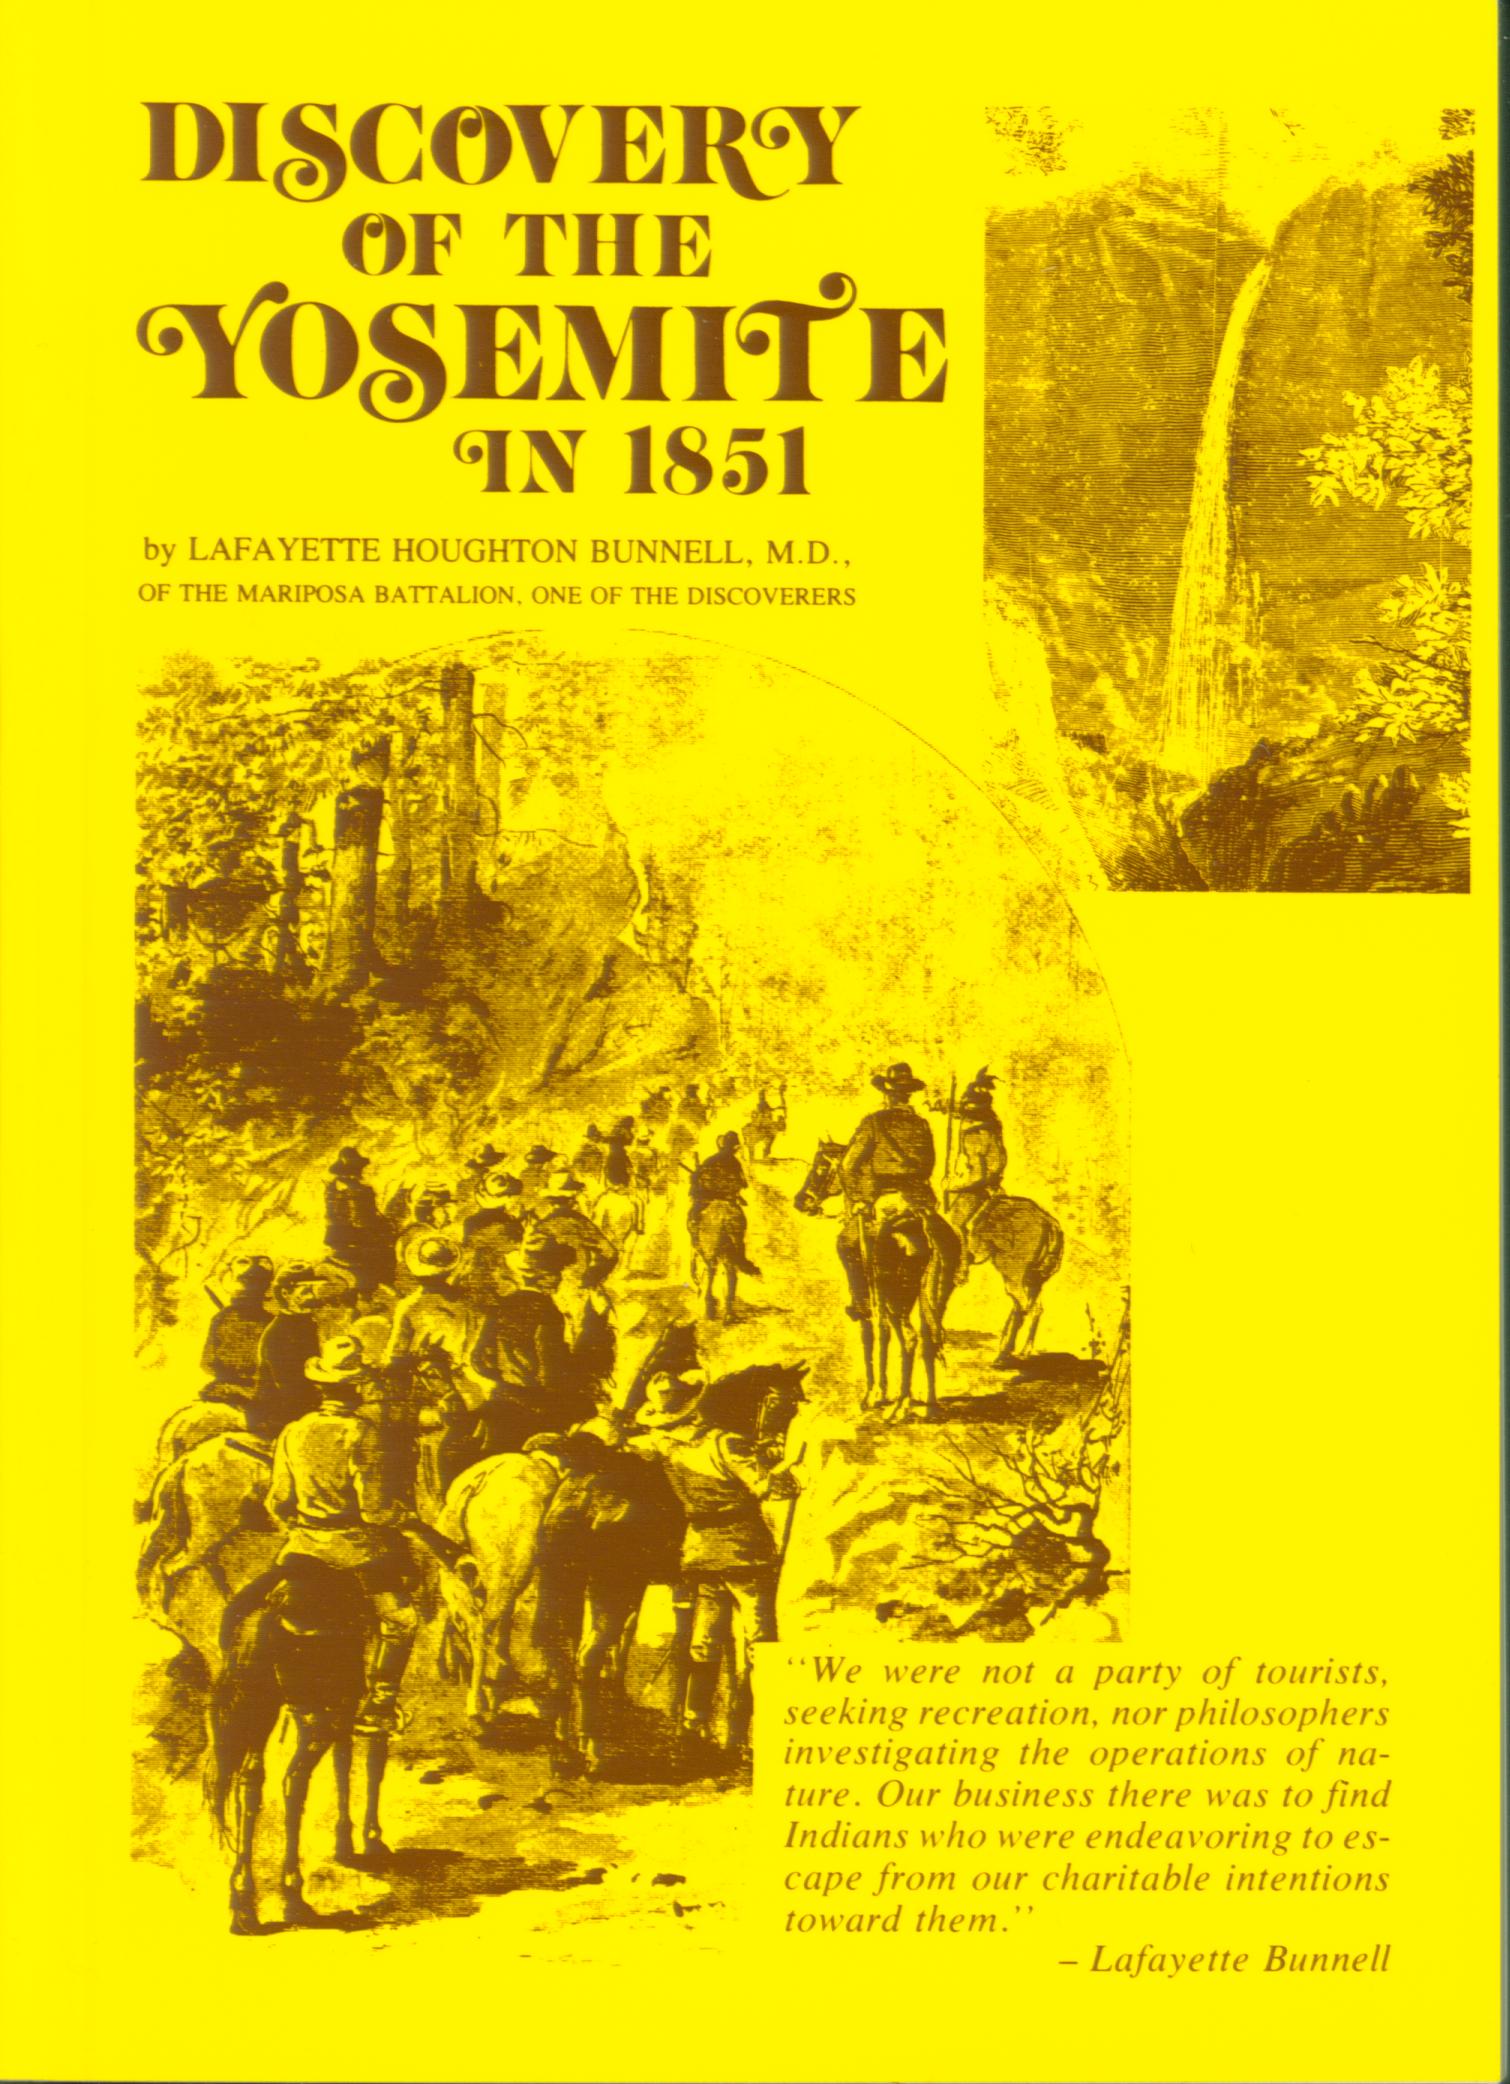 DISCOVERY OF THE YOSEMITE IN 1851 (CA).